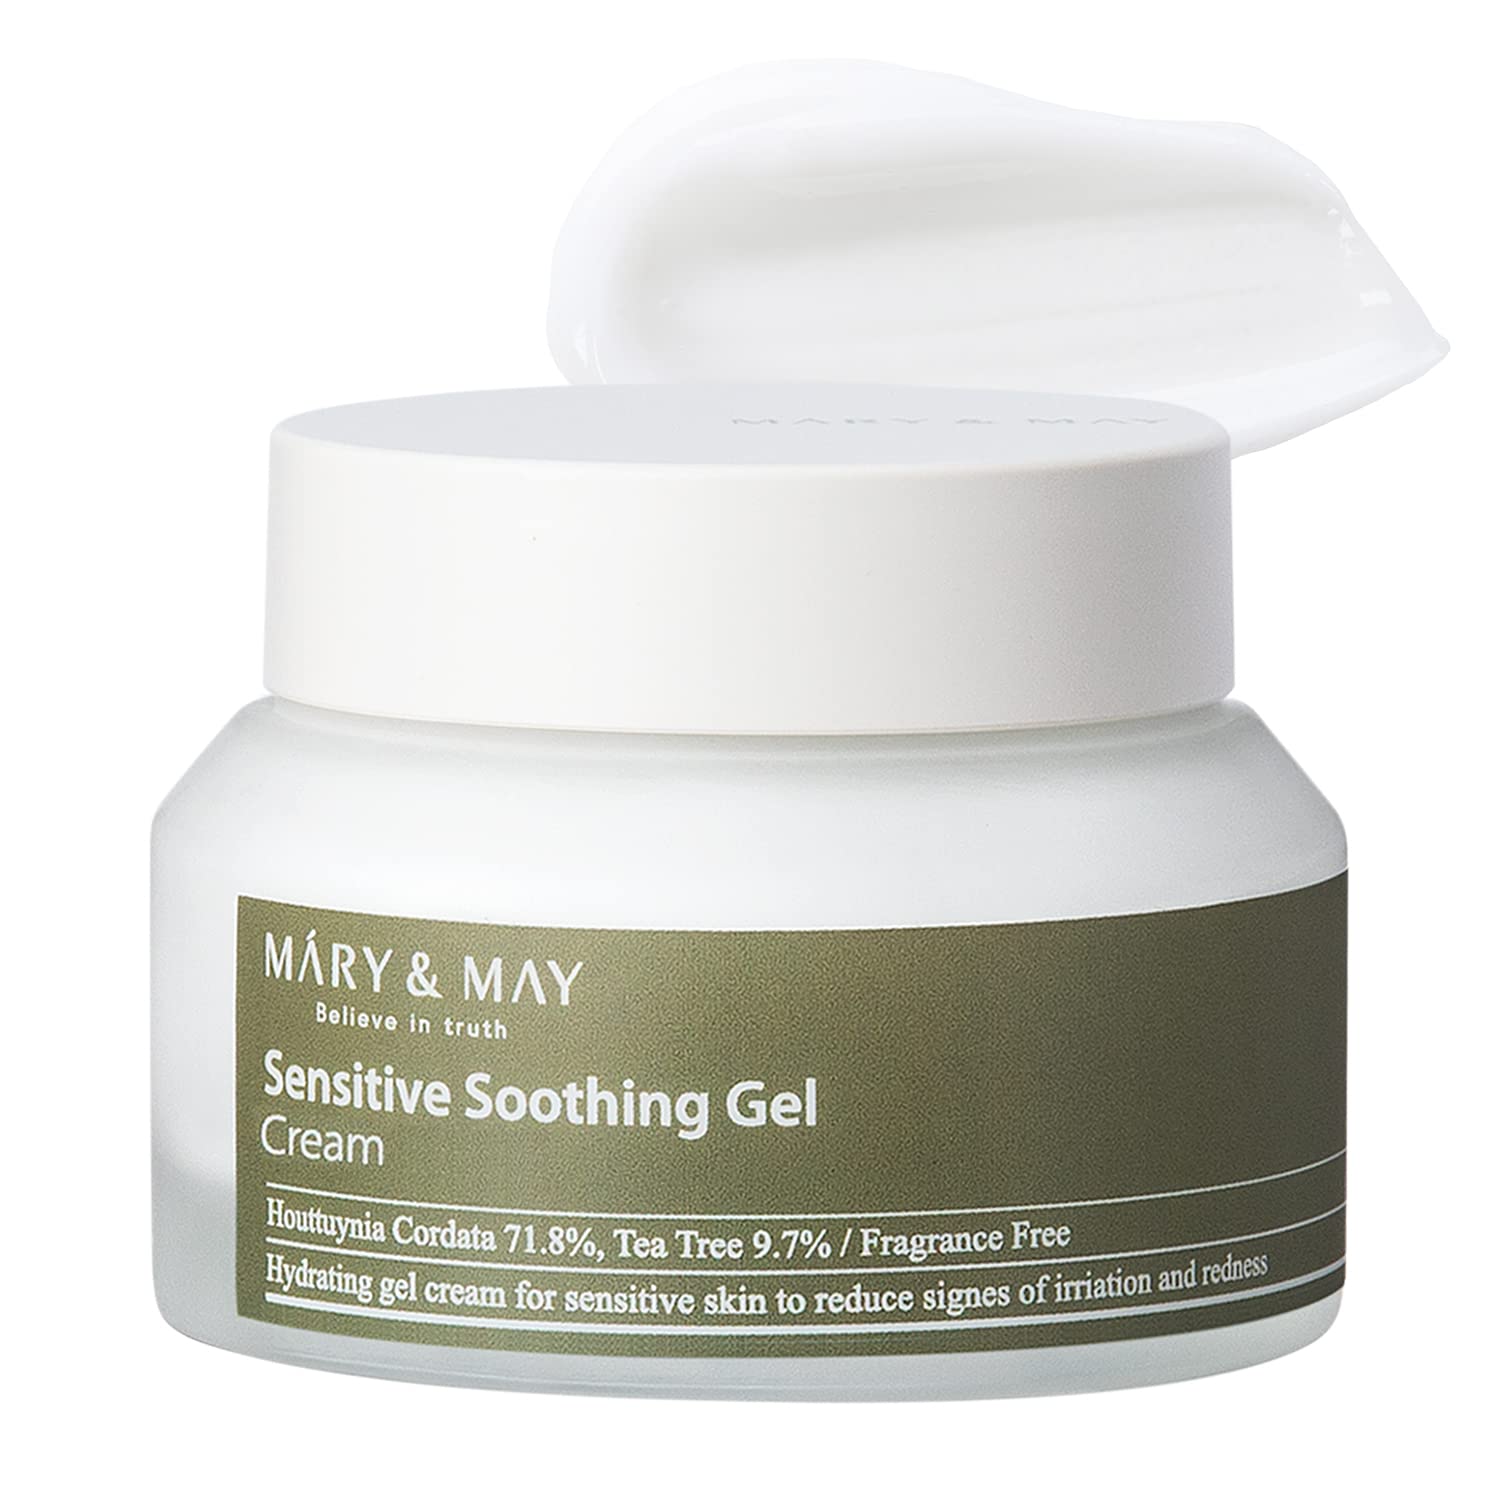 Mary&May Sensitive Soothing Gel Blemish Cream Texture